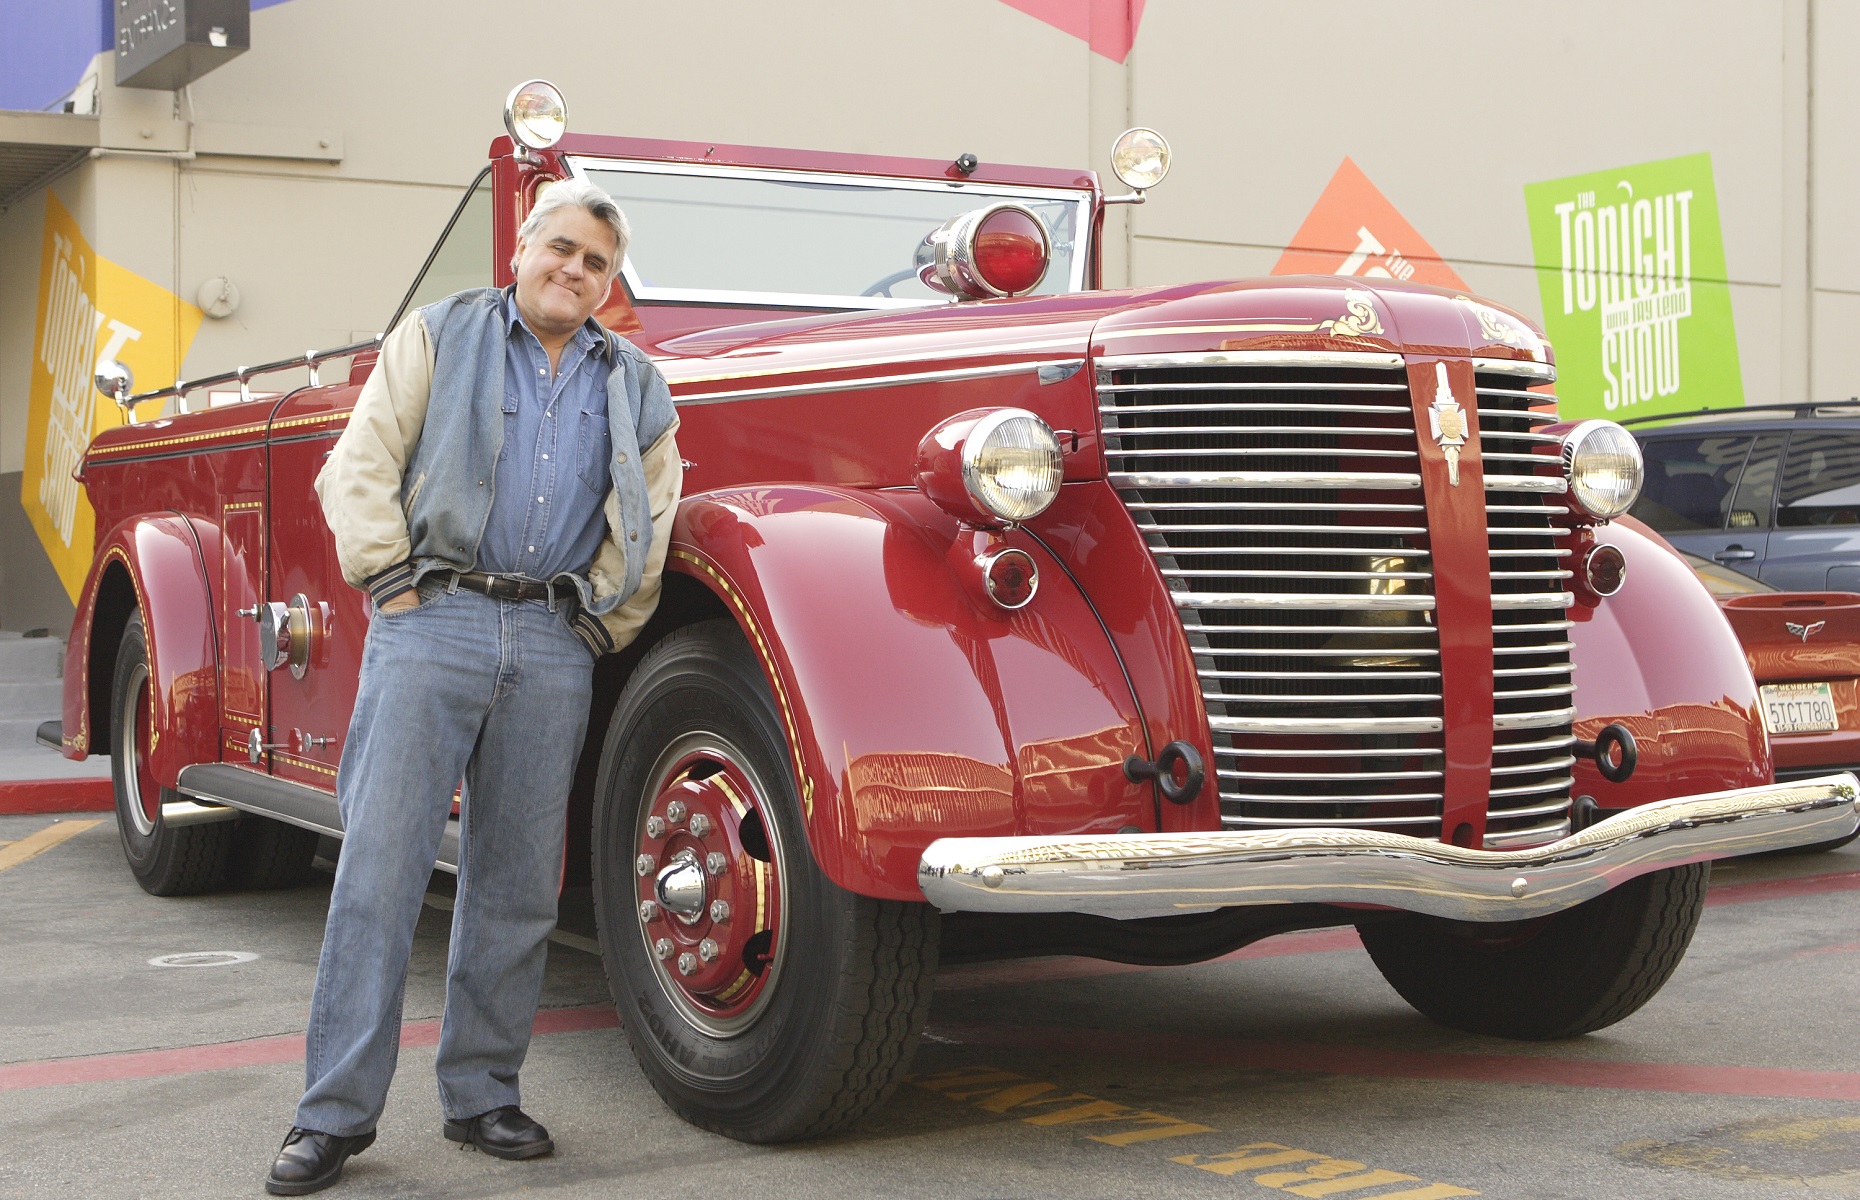 The amazing car collection of Jay Leno